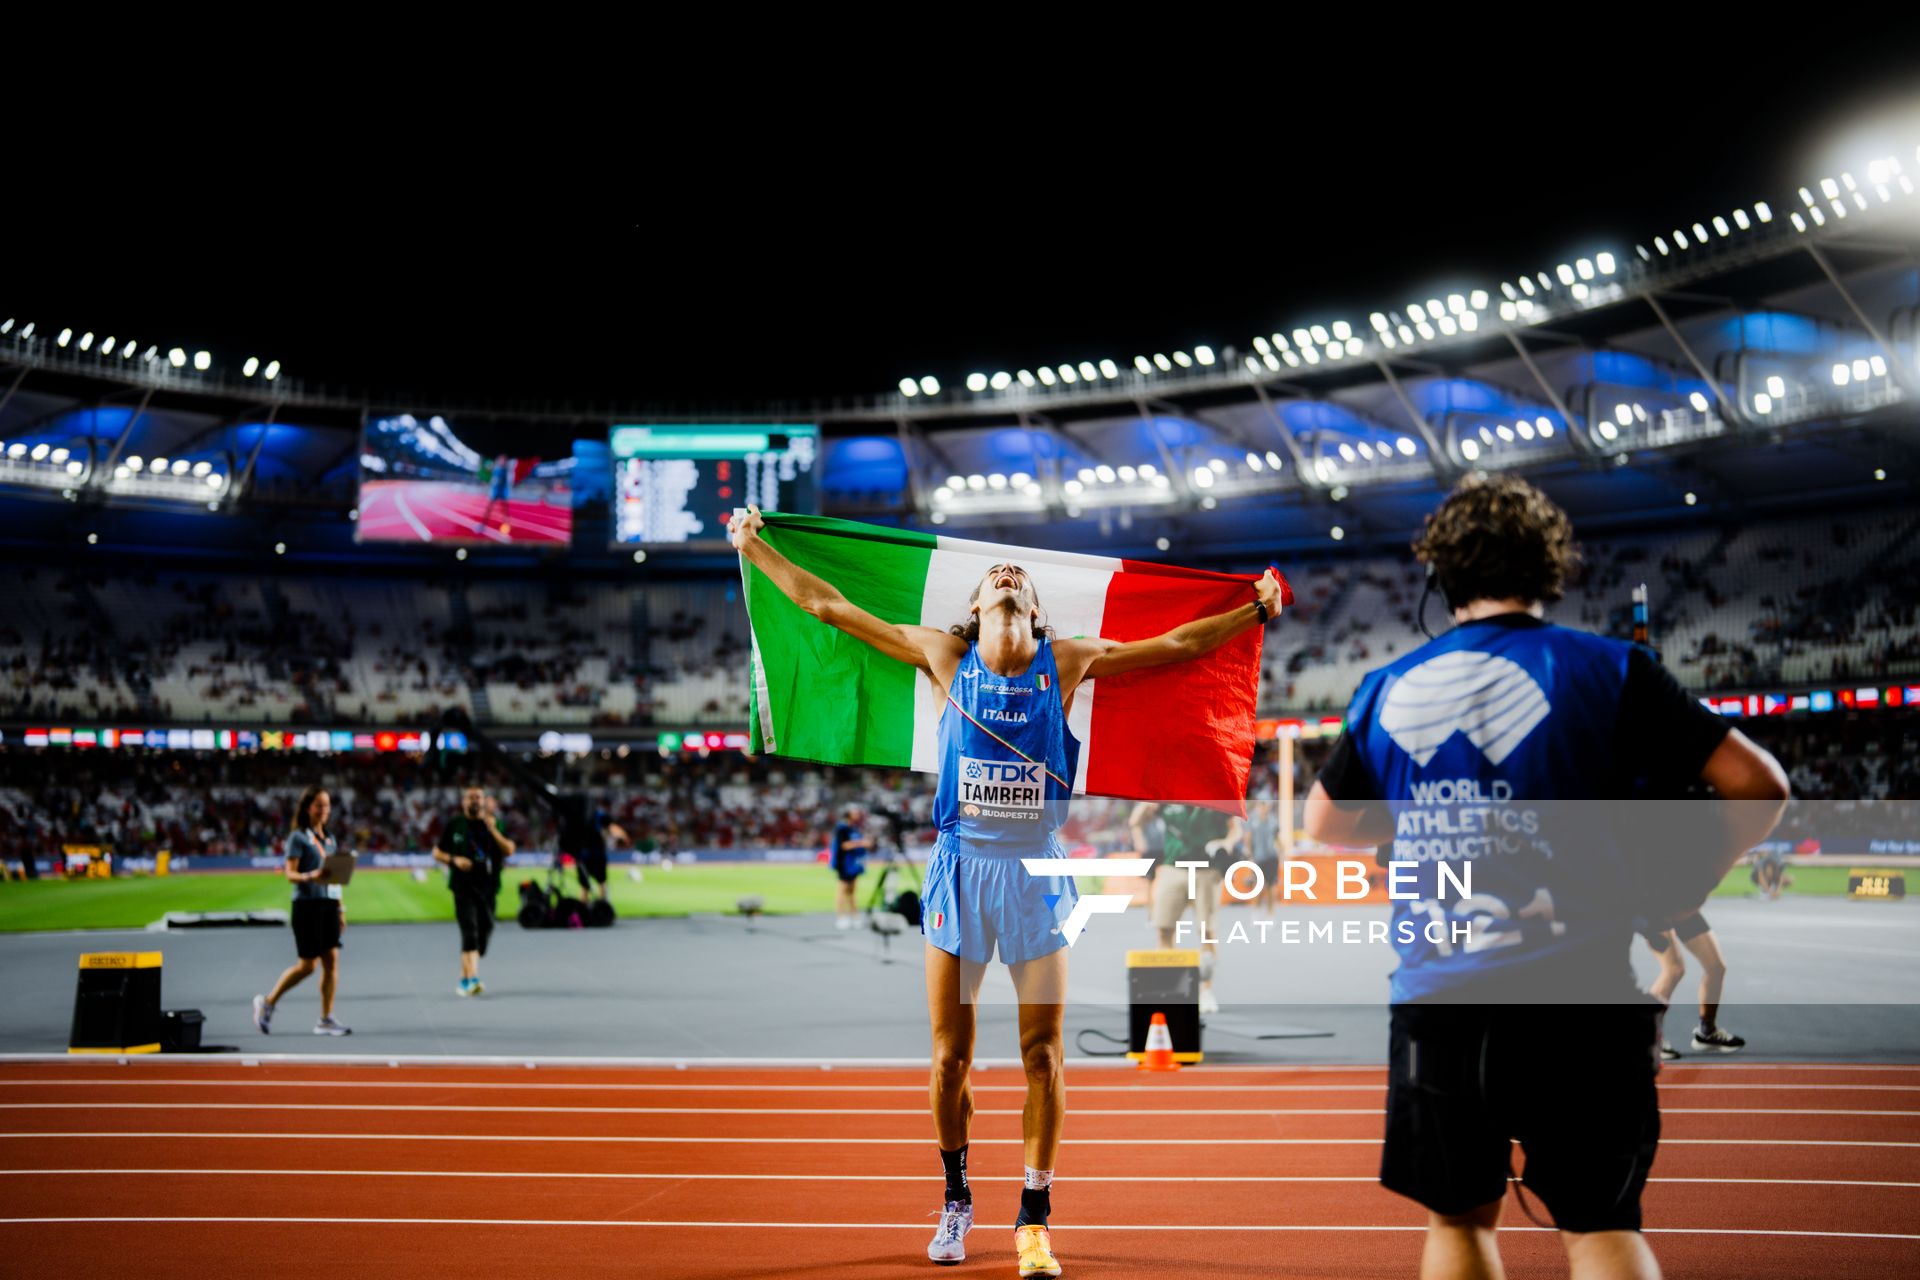 Gianmarco Tamberi (ITA/Italy) during the High Jump on Day 4 of the World Athletics Championships Budapest 23 at the National Athletics Centre in Budapest, Hungary on August 22, 2023.